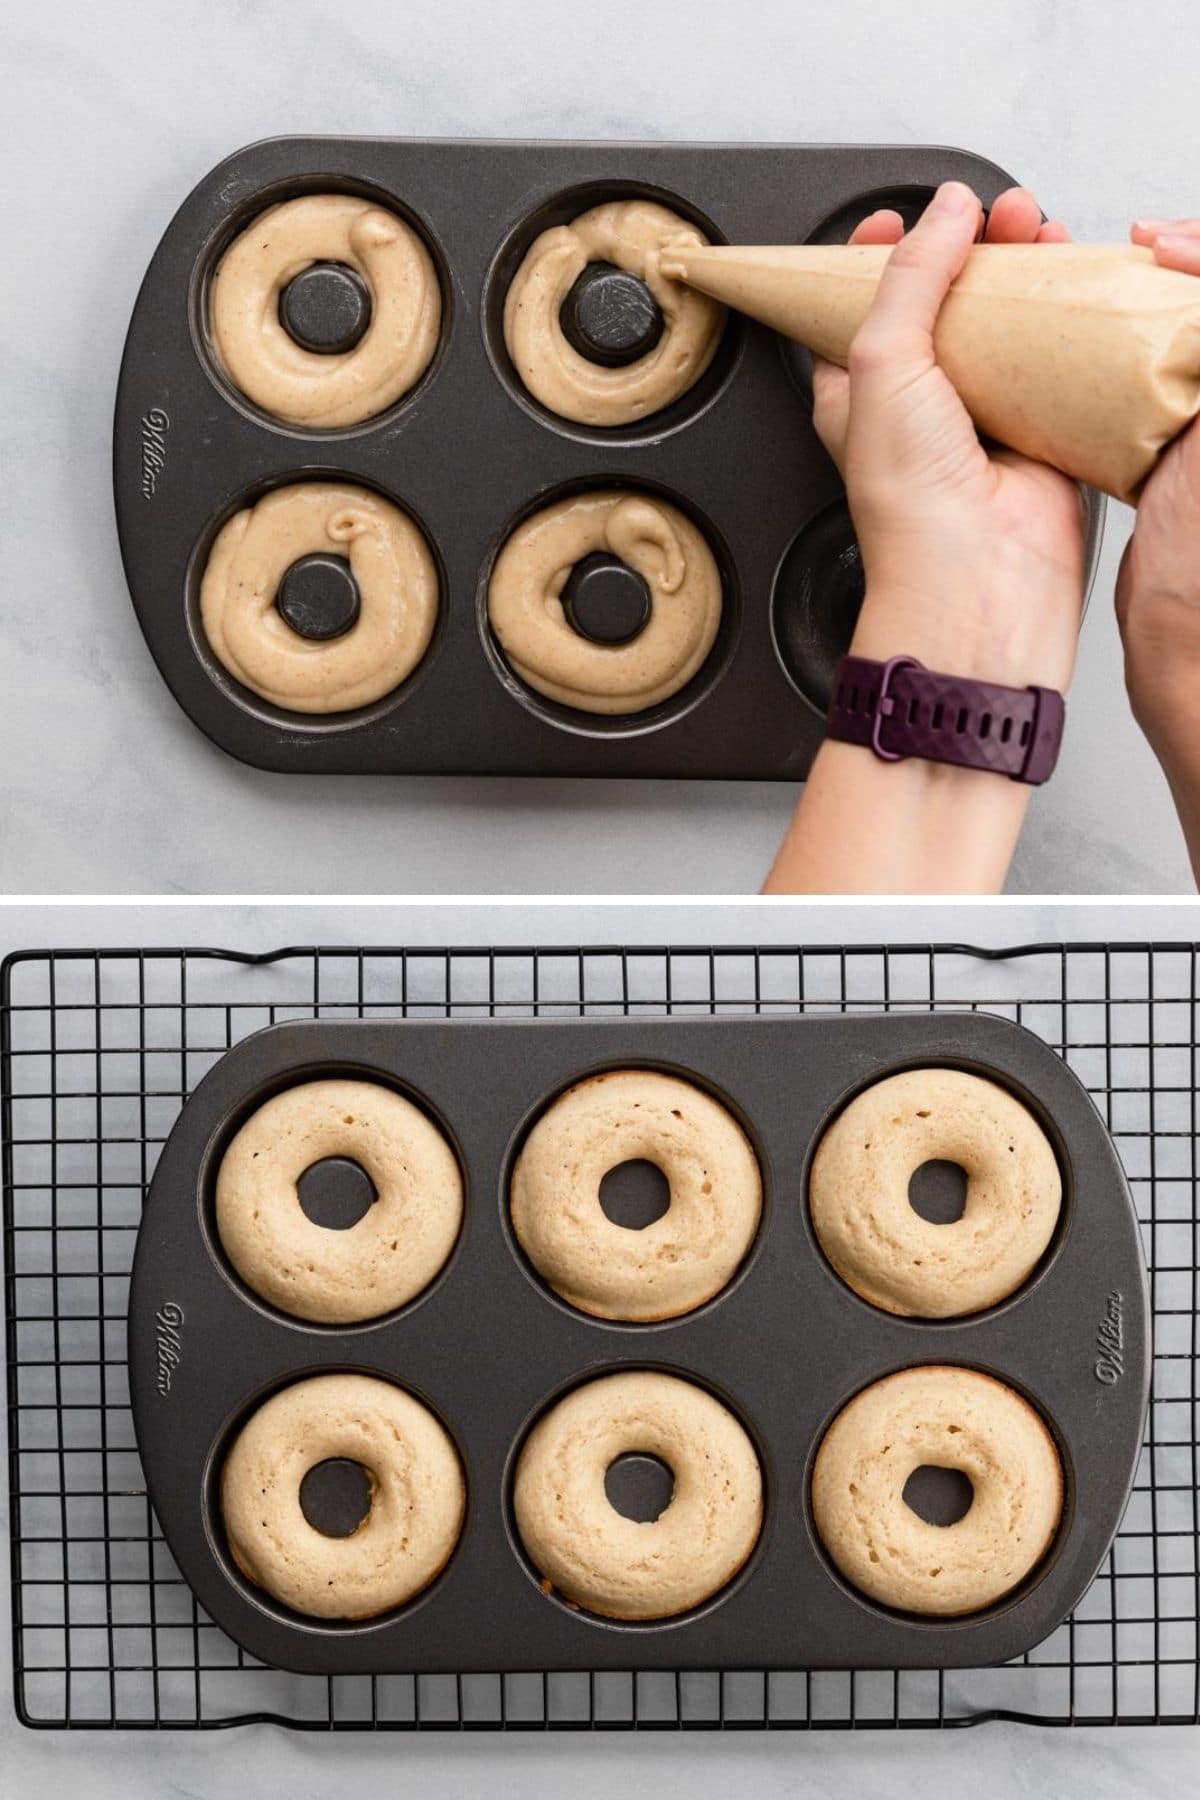 process shots showing how to pipe donut batter into donut pans and fully baked donuts in pans